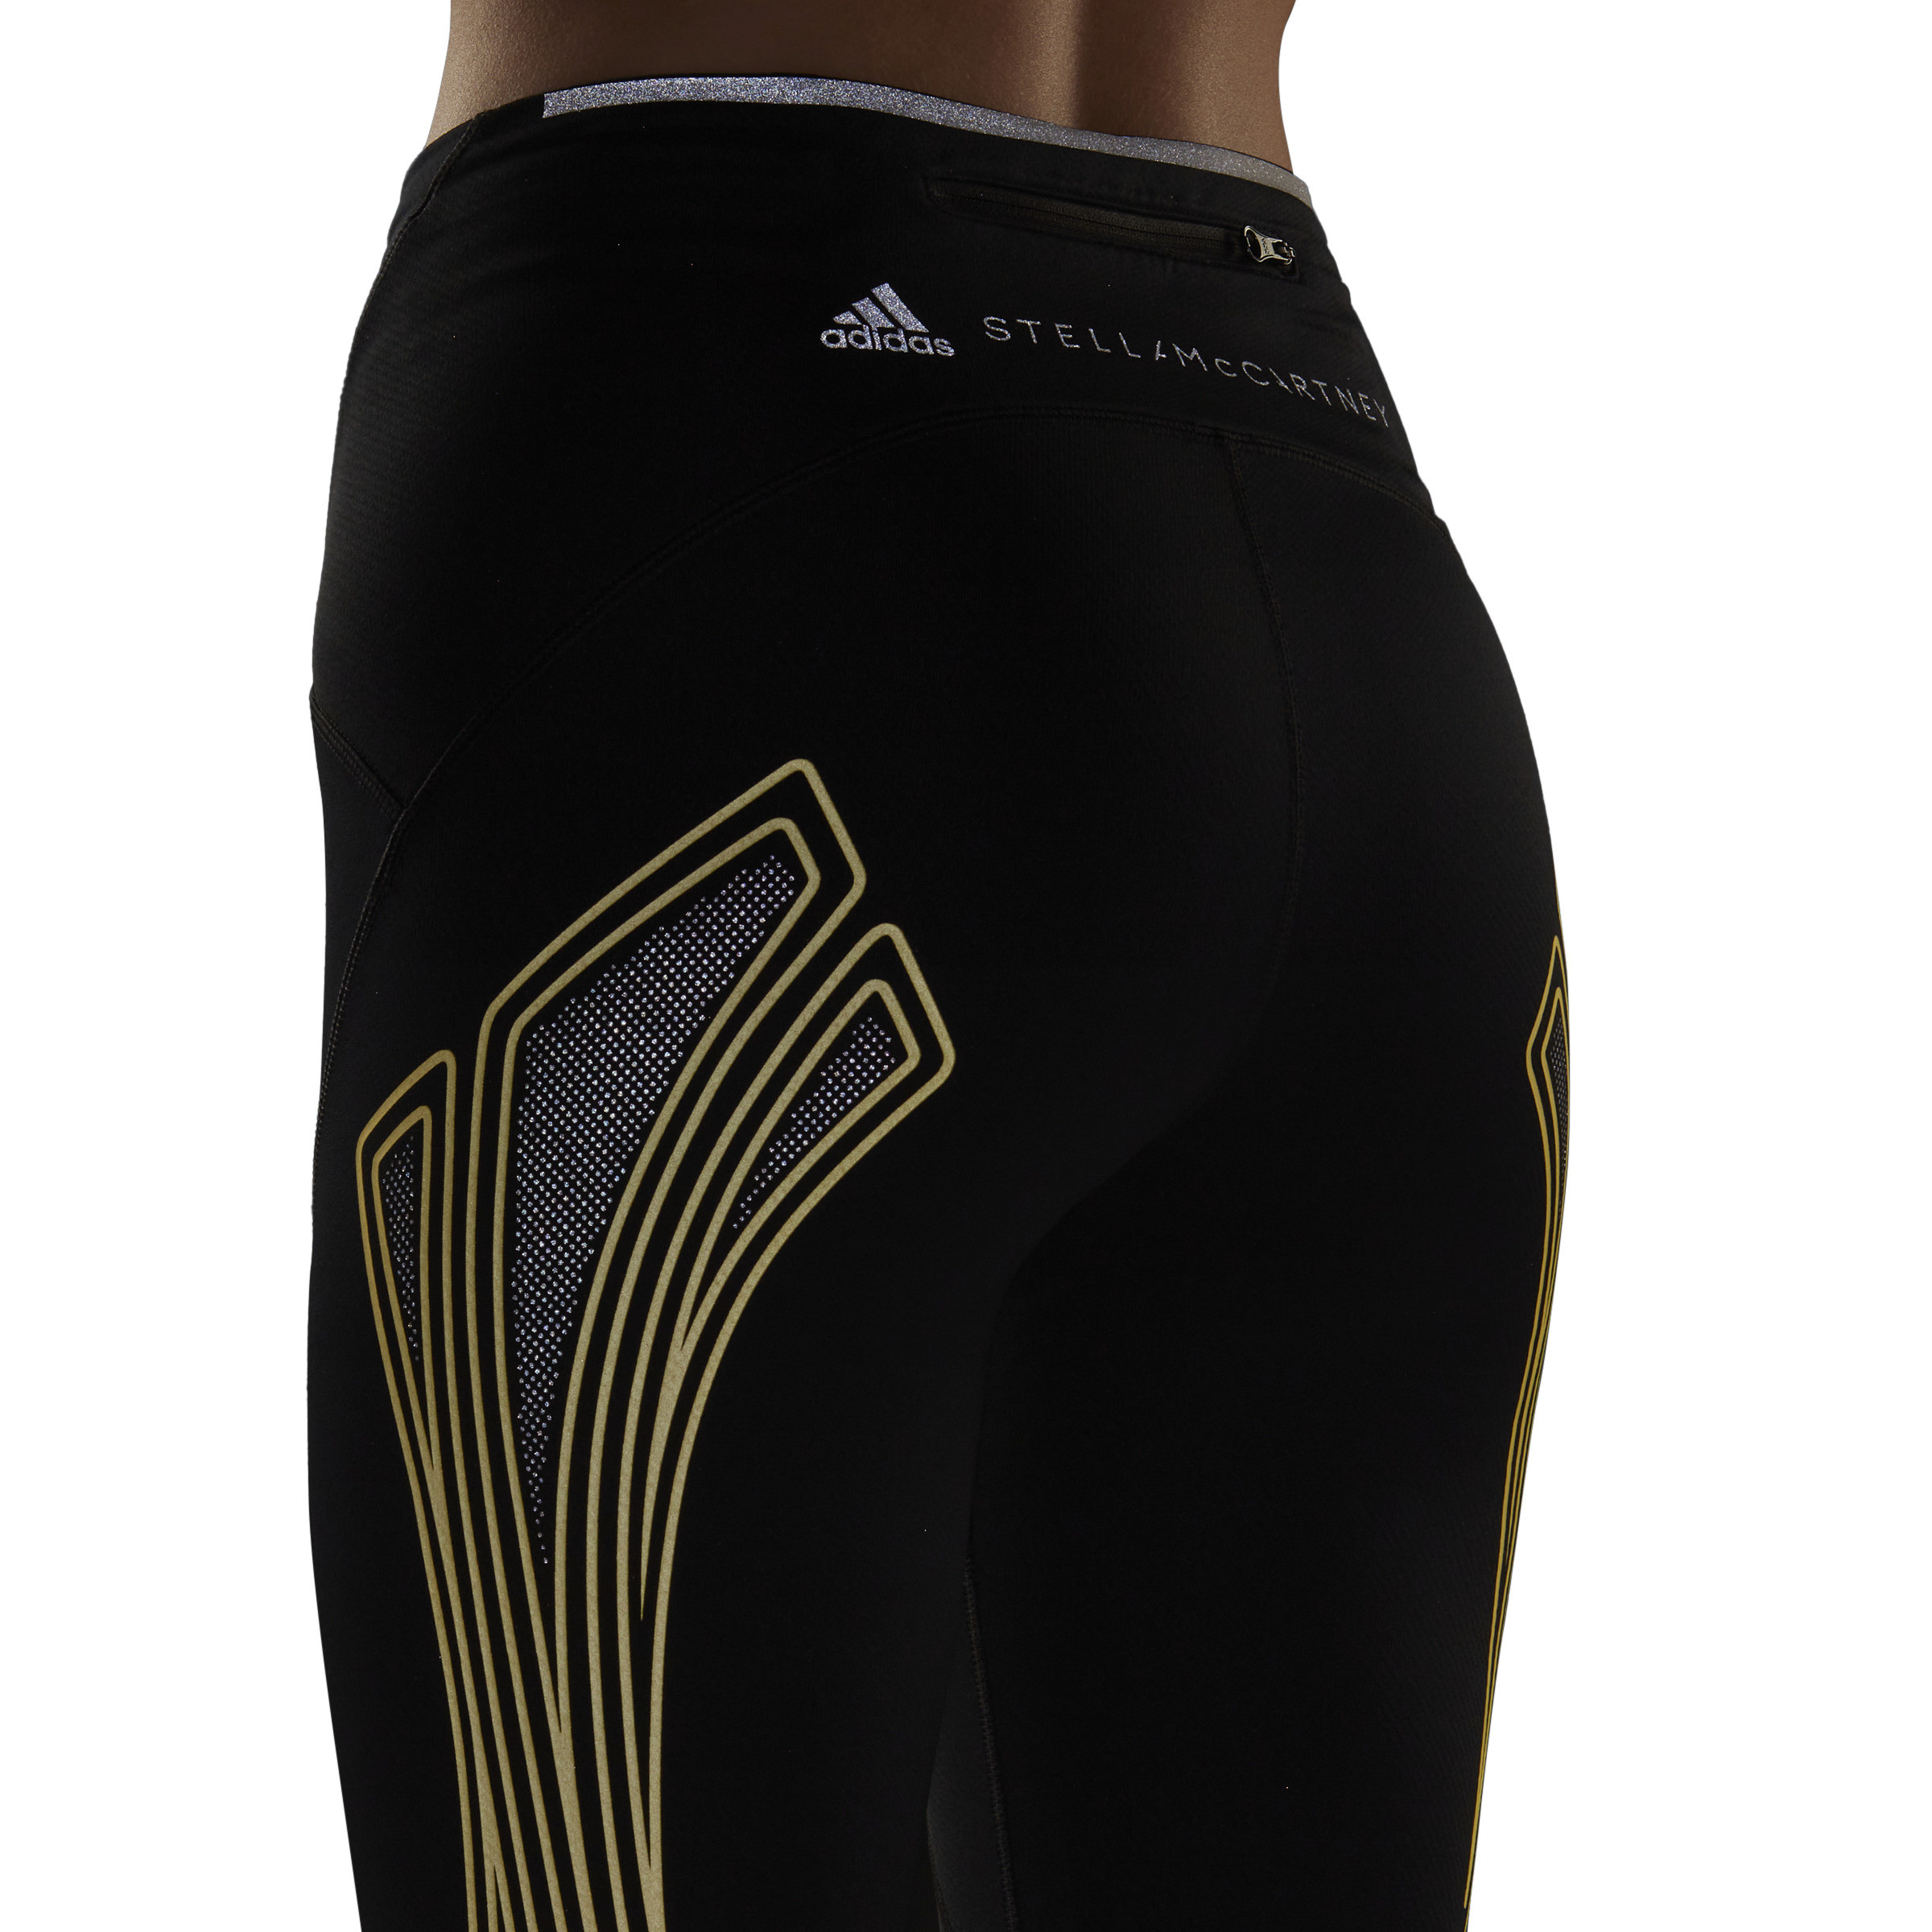 Adidas by Stella McCartney - TruePace COLD.RDY running leggings, Black, large image number 4